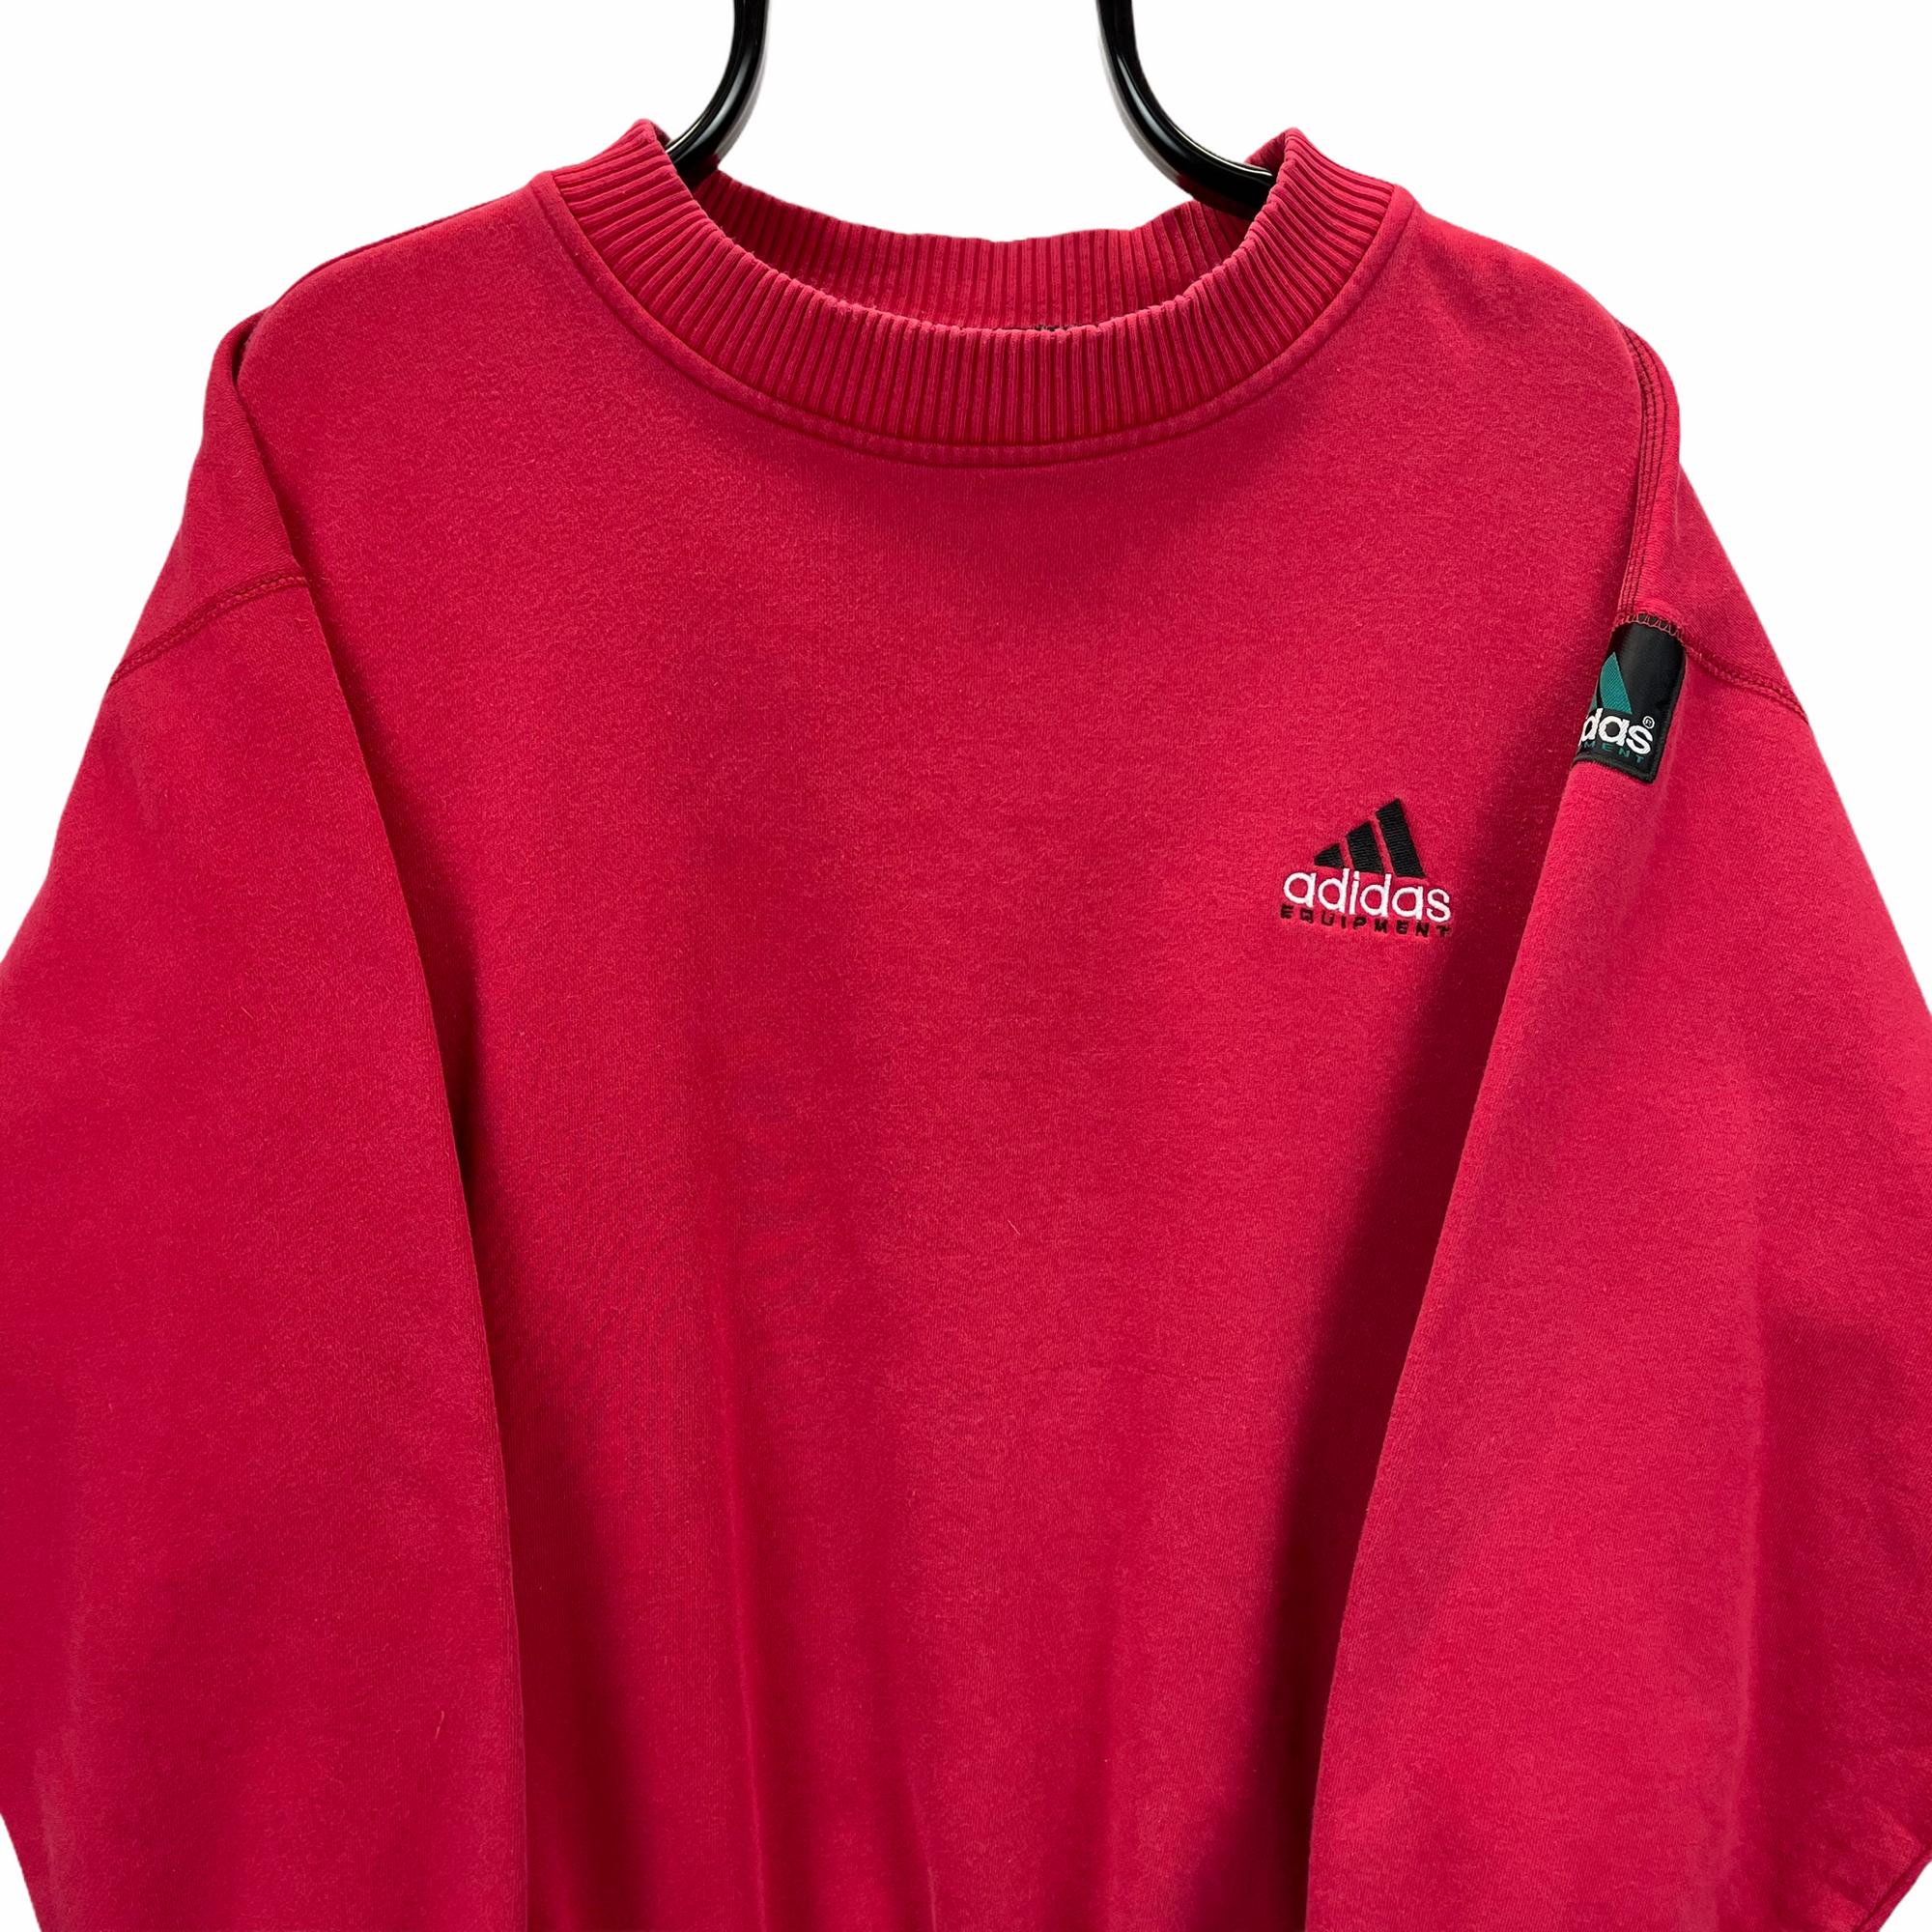 VINTAGE 90S ADIDAS EQUIPMENT EMBROIDERED SMALL LOGO SWEATSHIRT IN RED - MEN'S LARGE/WOMEN'S XL